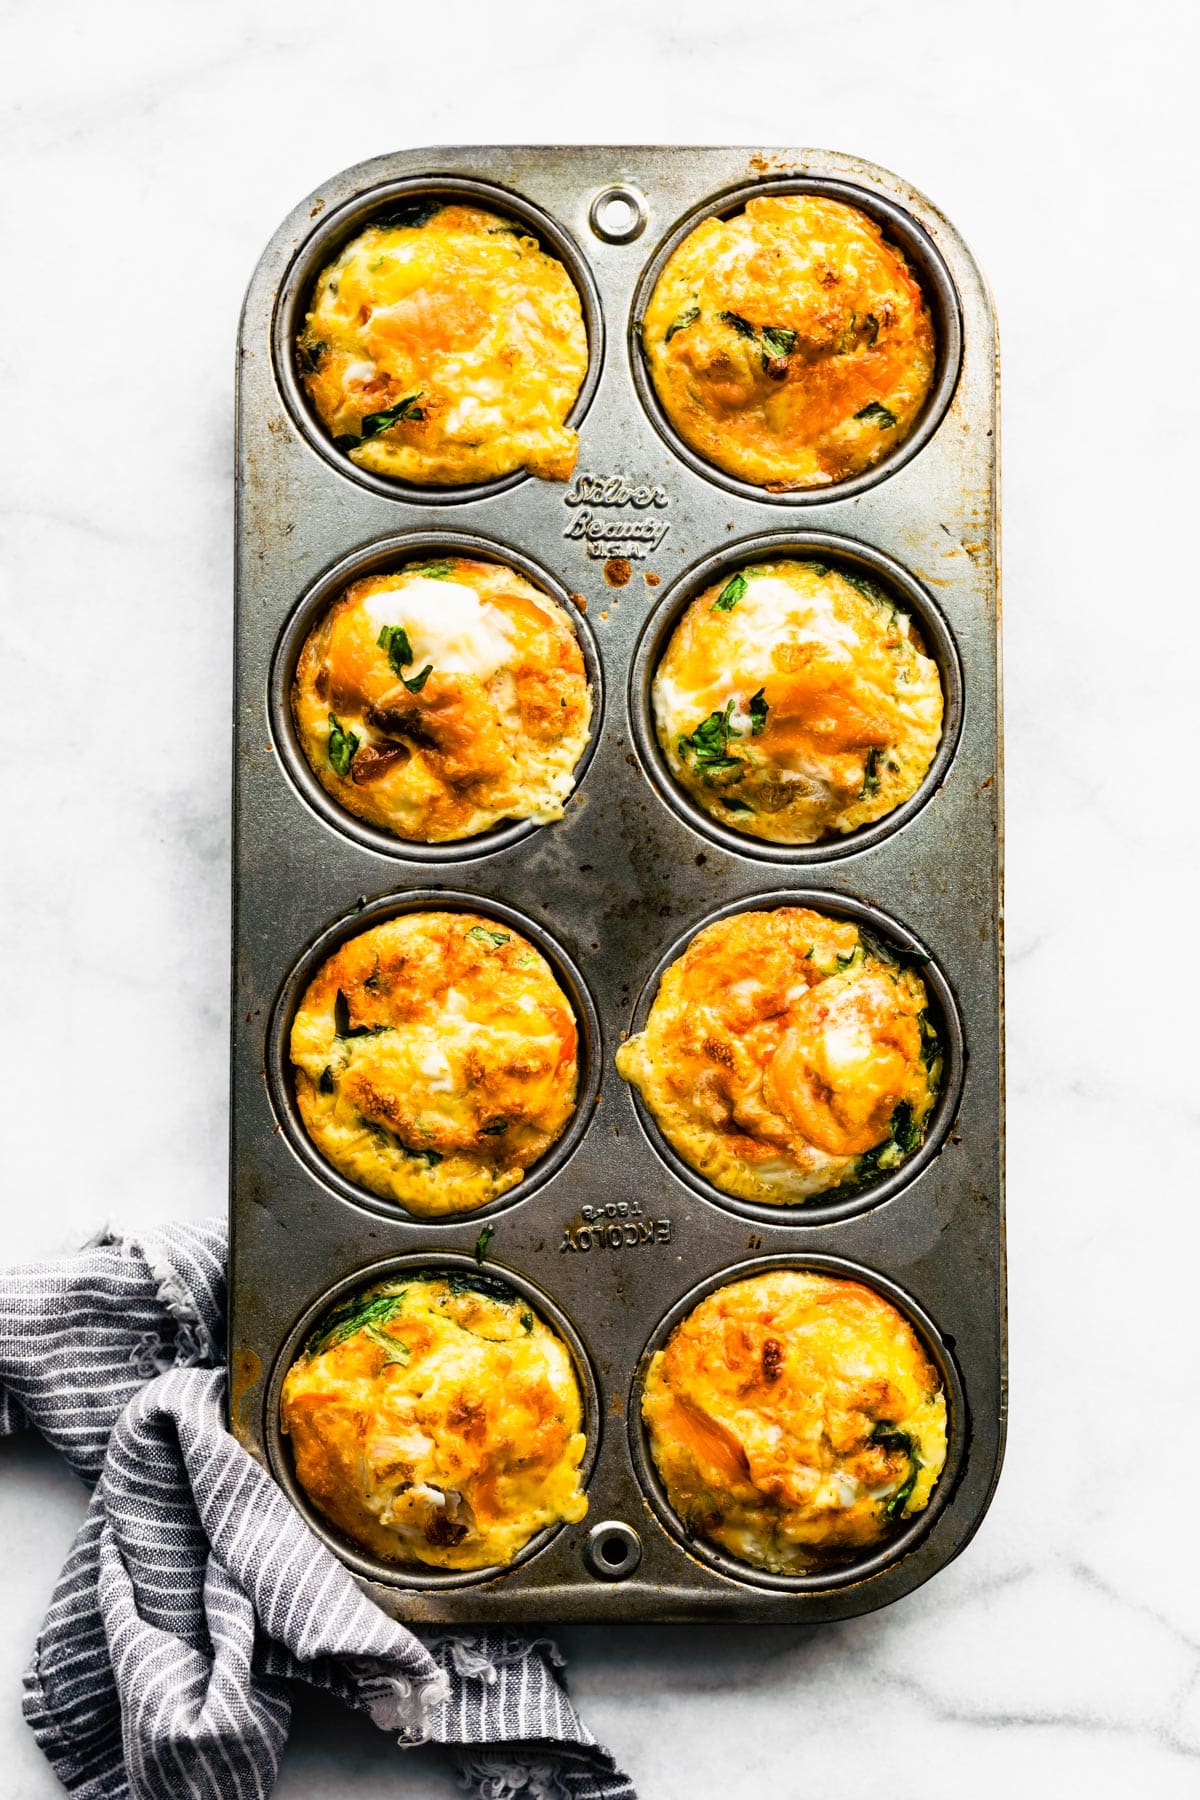 Cooked Frittata Muffins in a muffin pan.